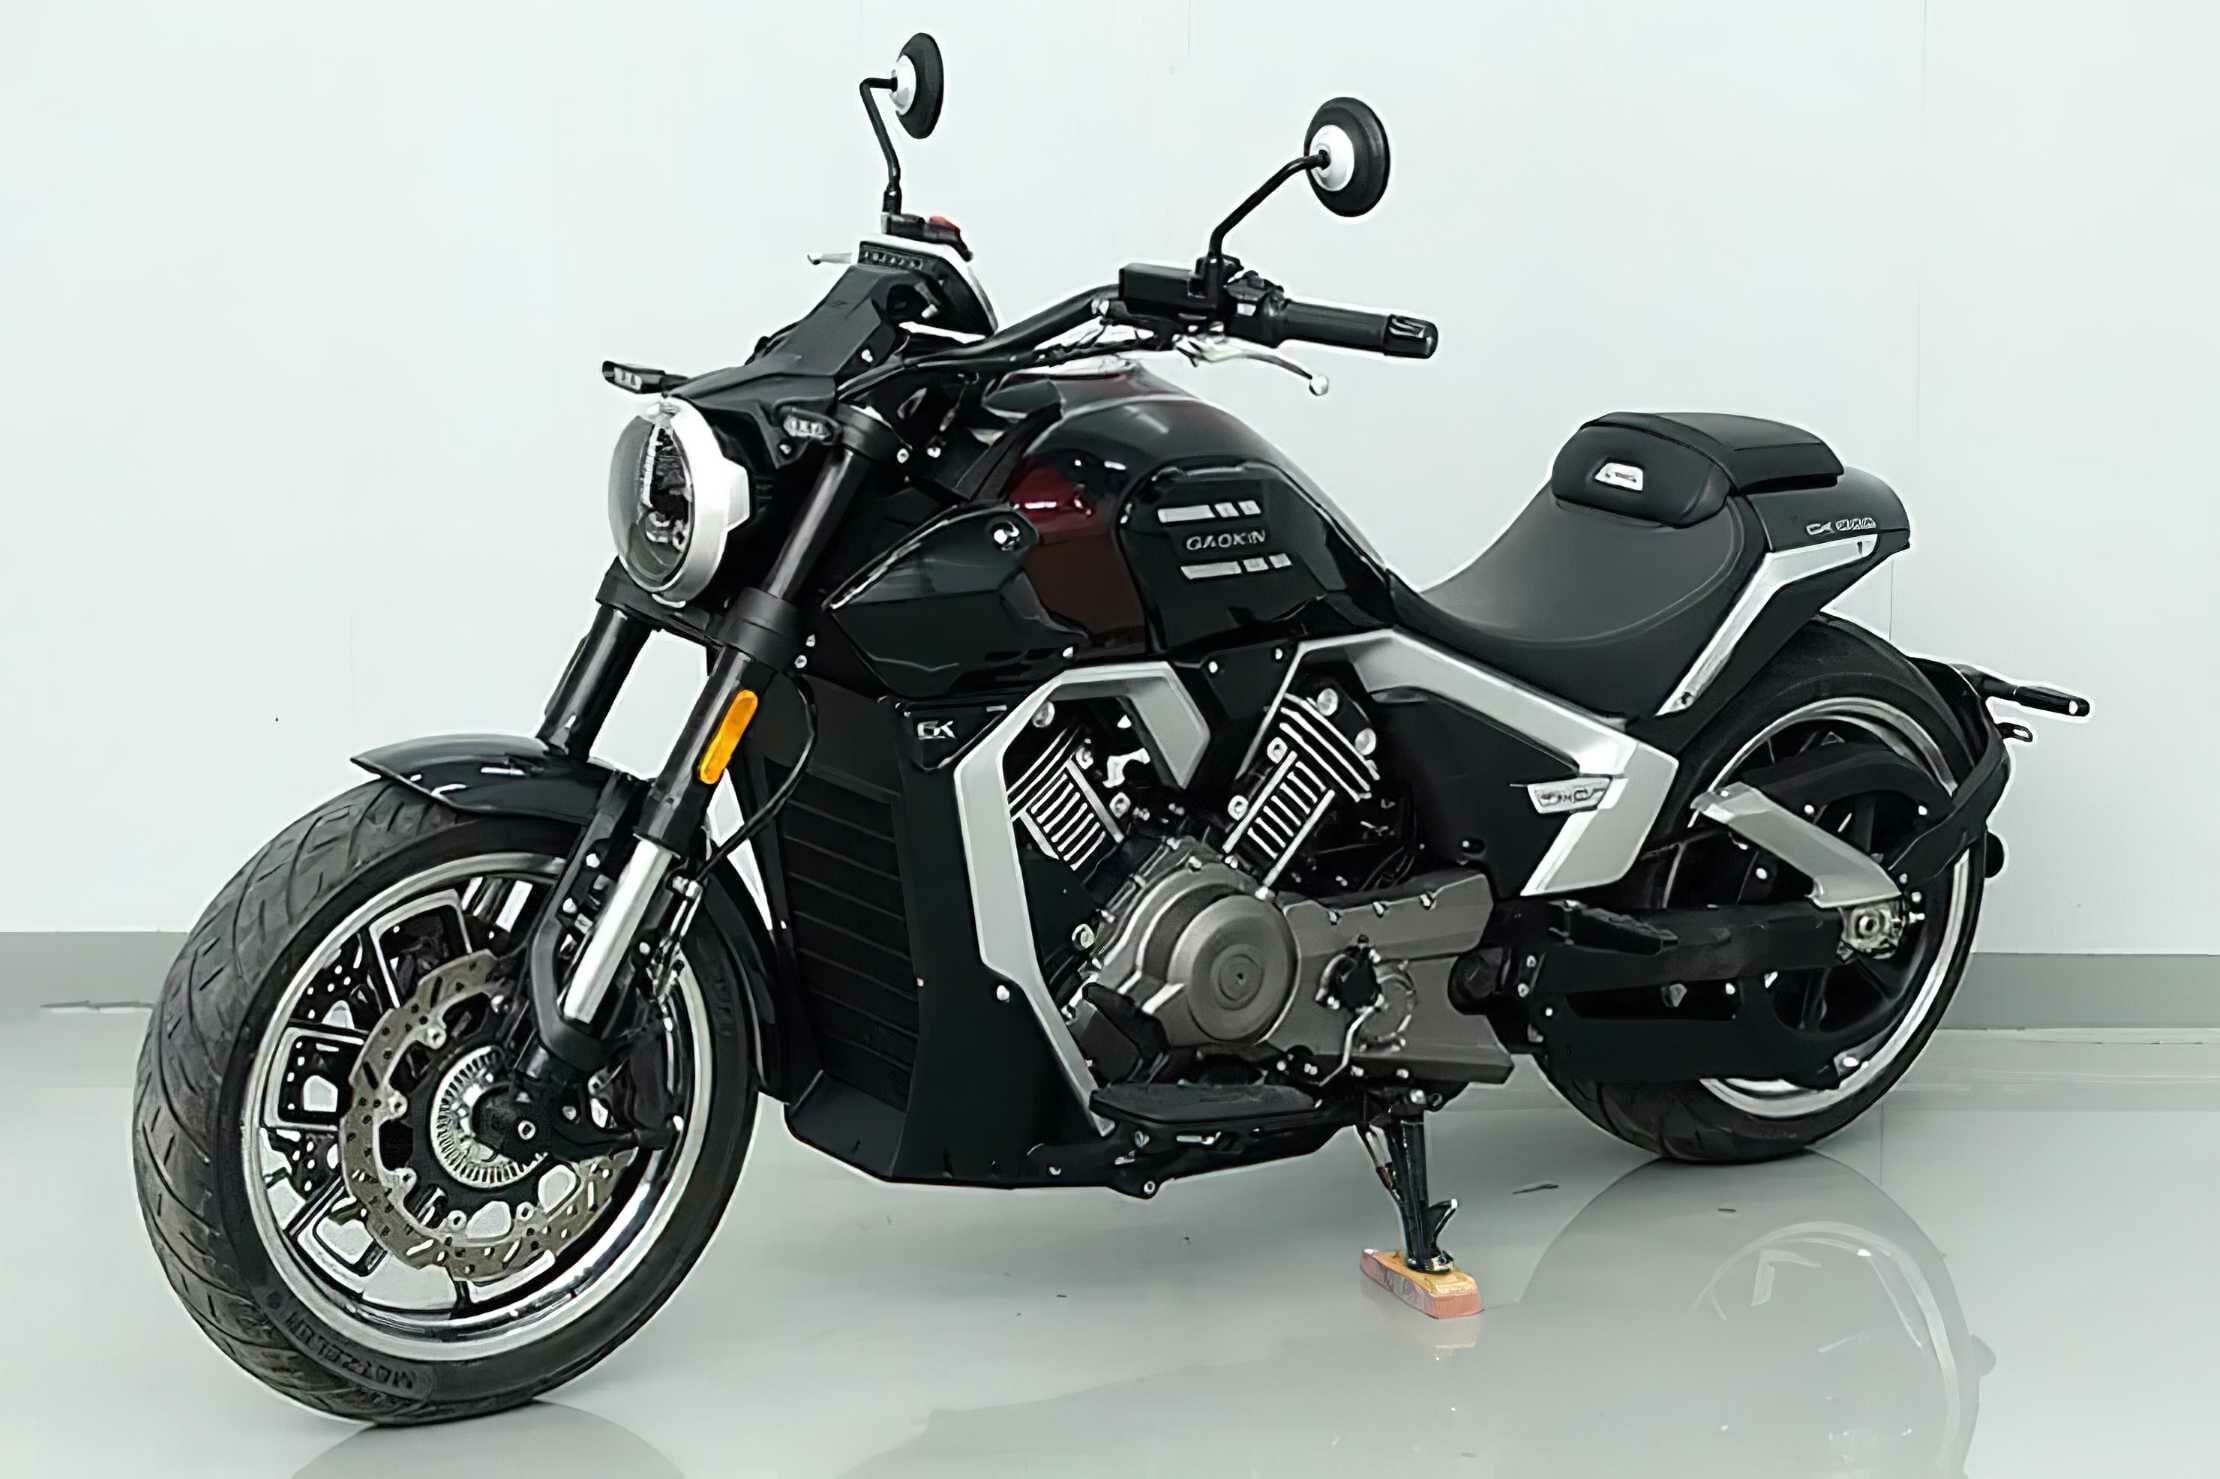 The Gaokin GK1000 could become a new Brixton for Europe - MOTORCYCLES.NEWS